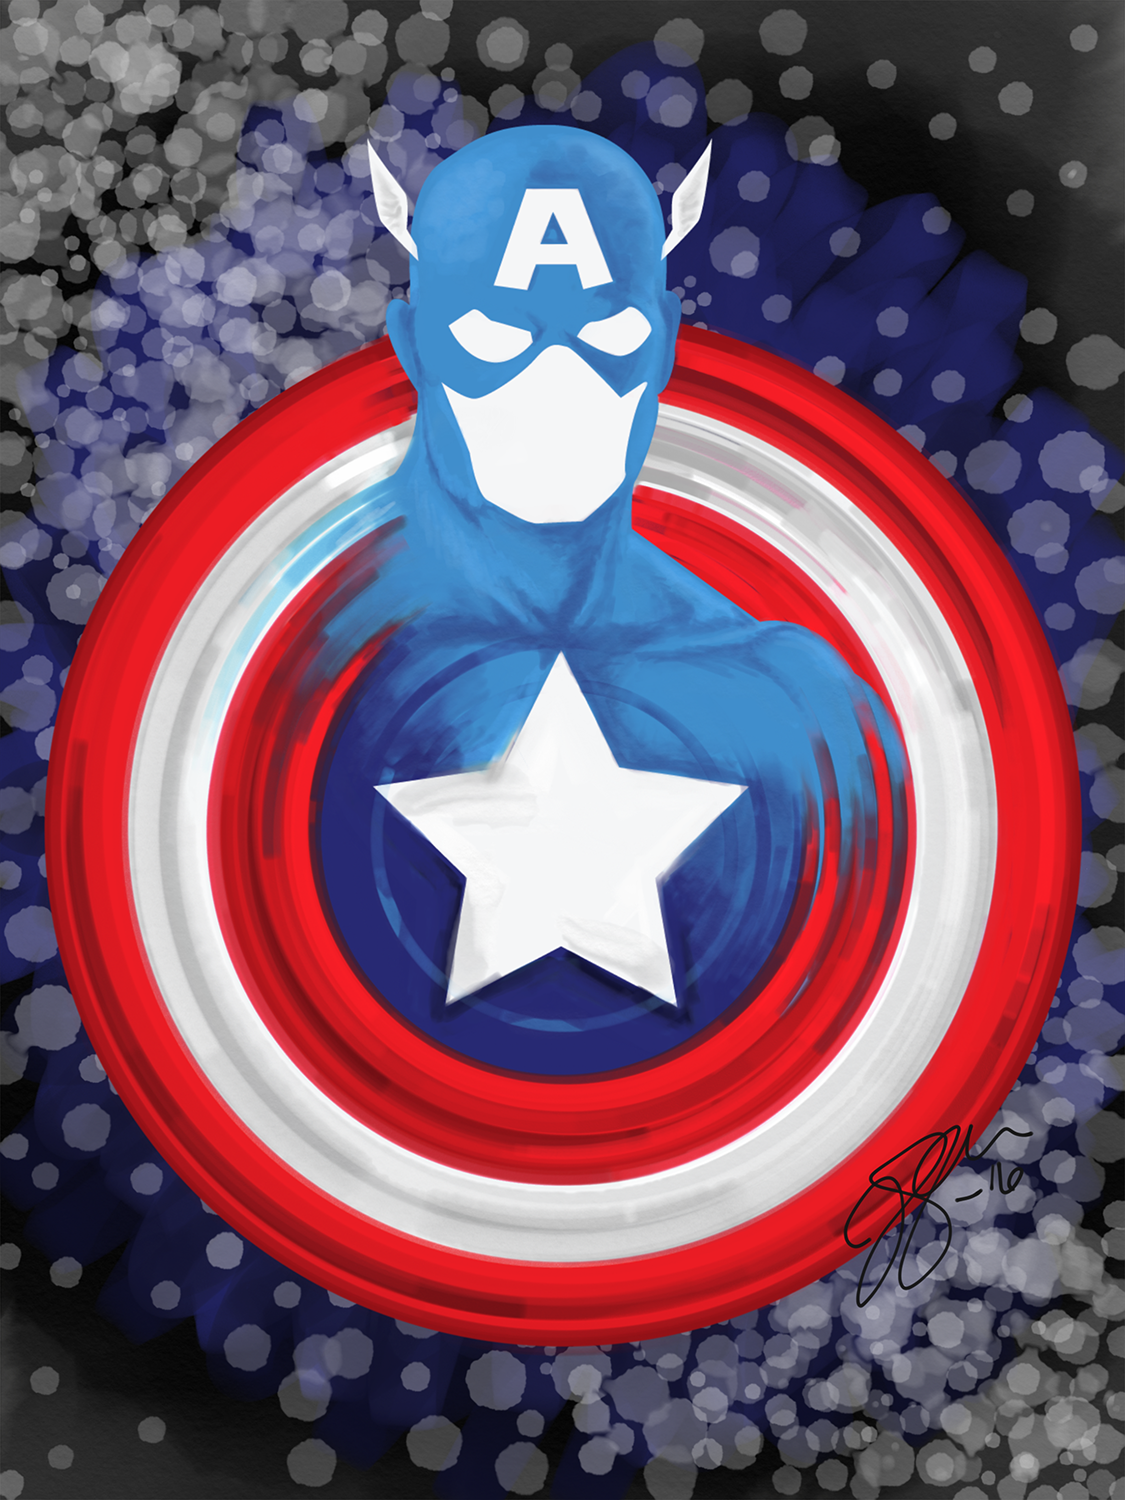 Captain America mixed with Shield - Adobe Sketch, iPad